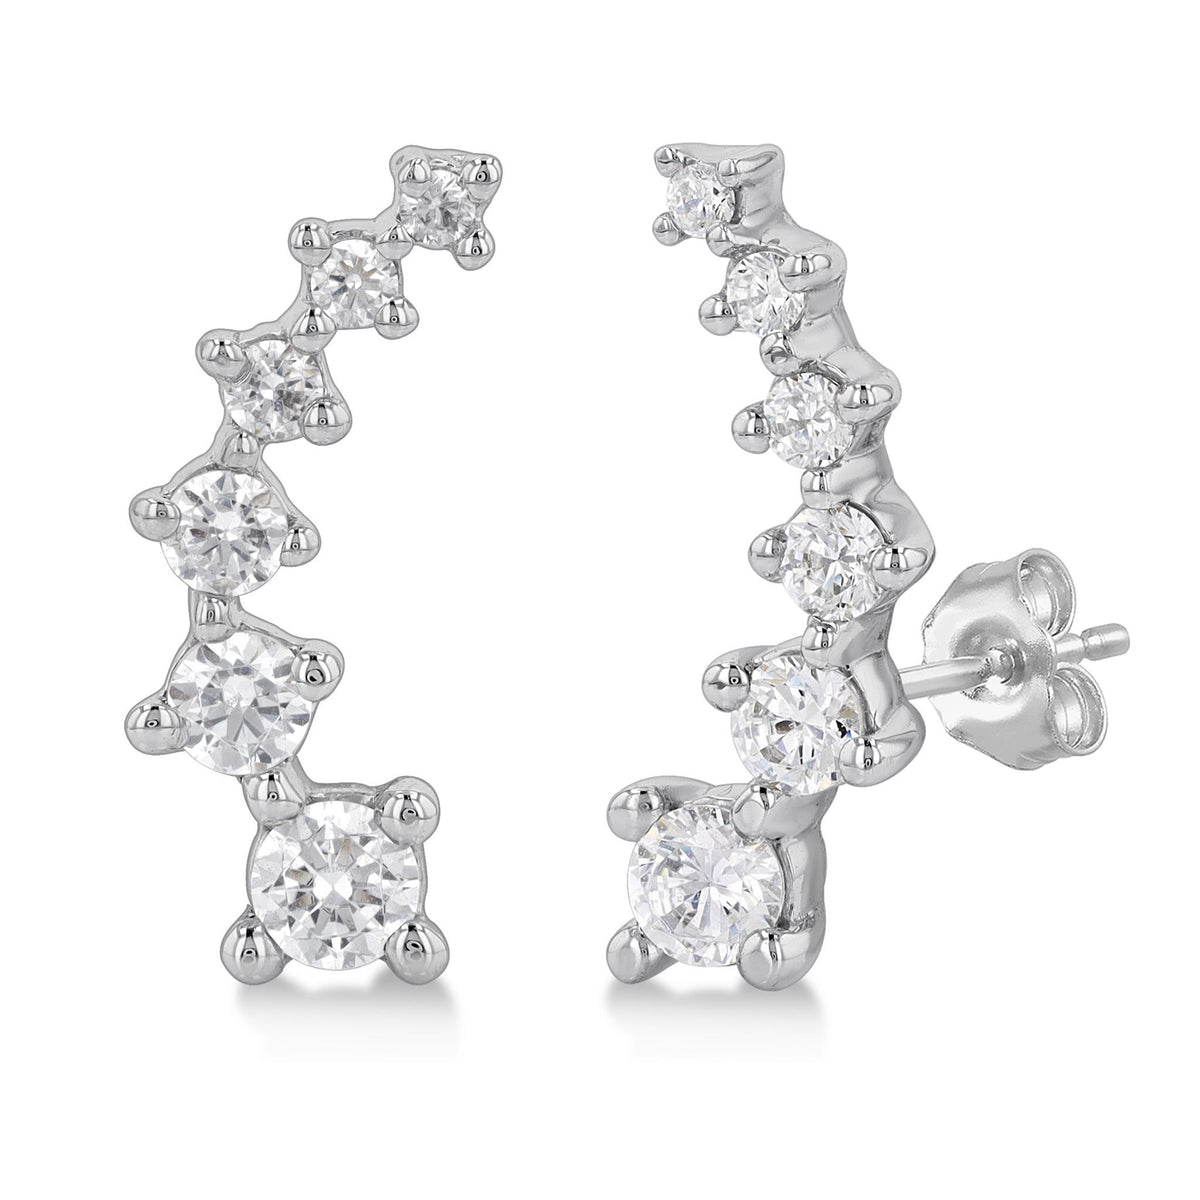 14Kt White Gold Climber Earrings with 0.50cttw Natural Diamonds